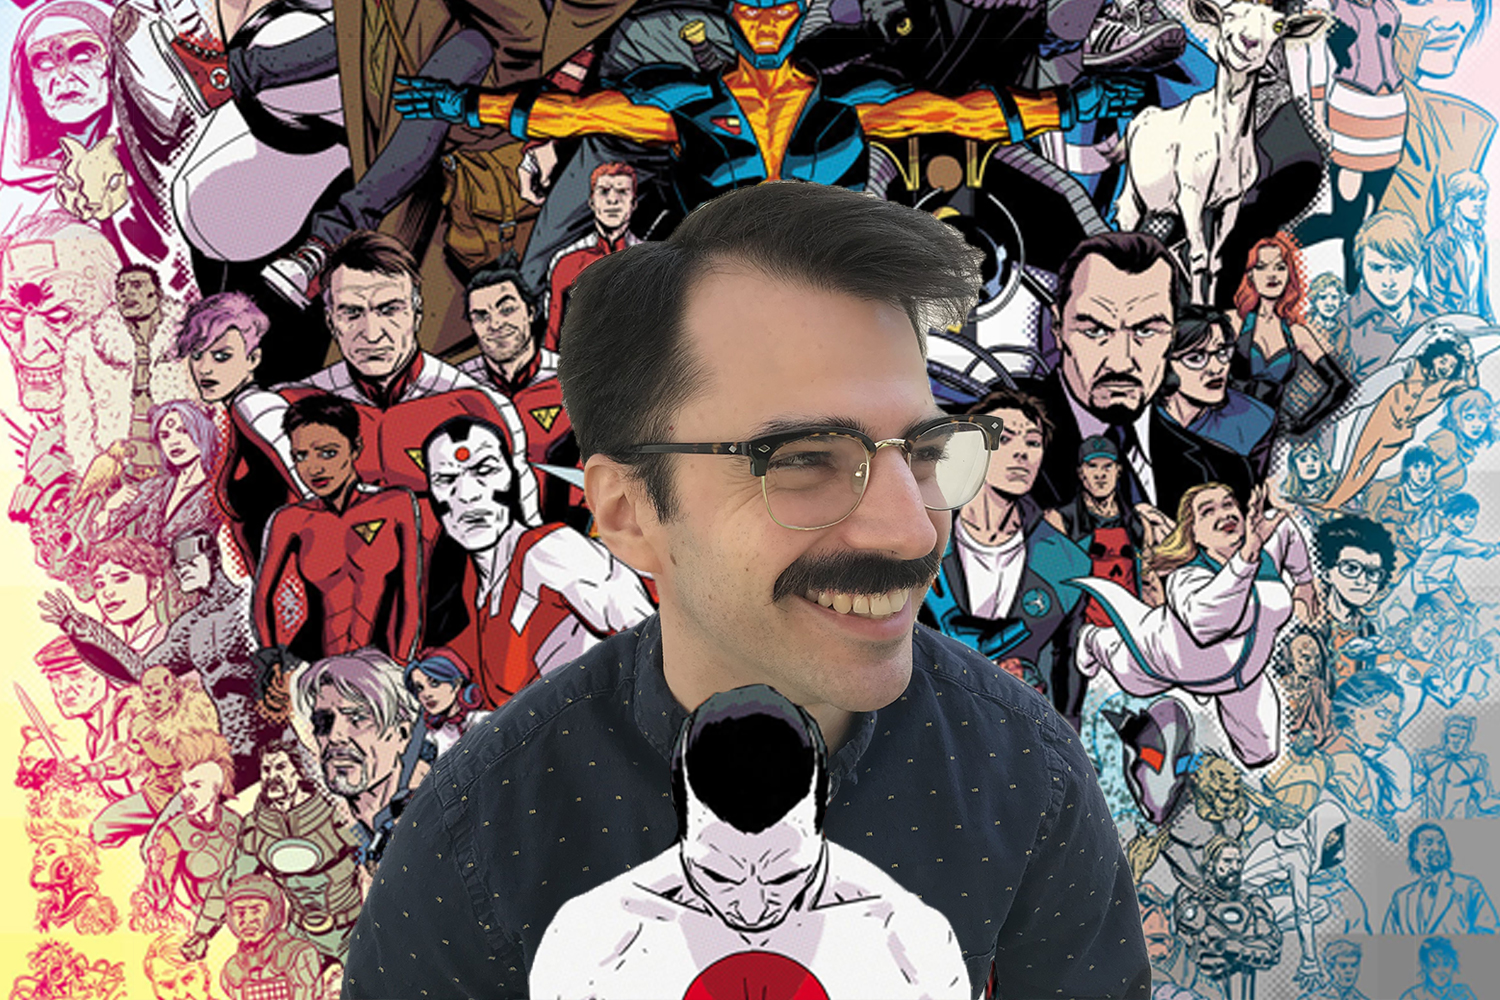 Peeling back the Valiant curtain: An interview with assistant editor Drew Baumgartner